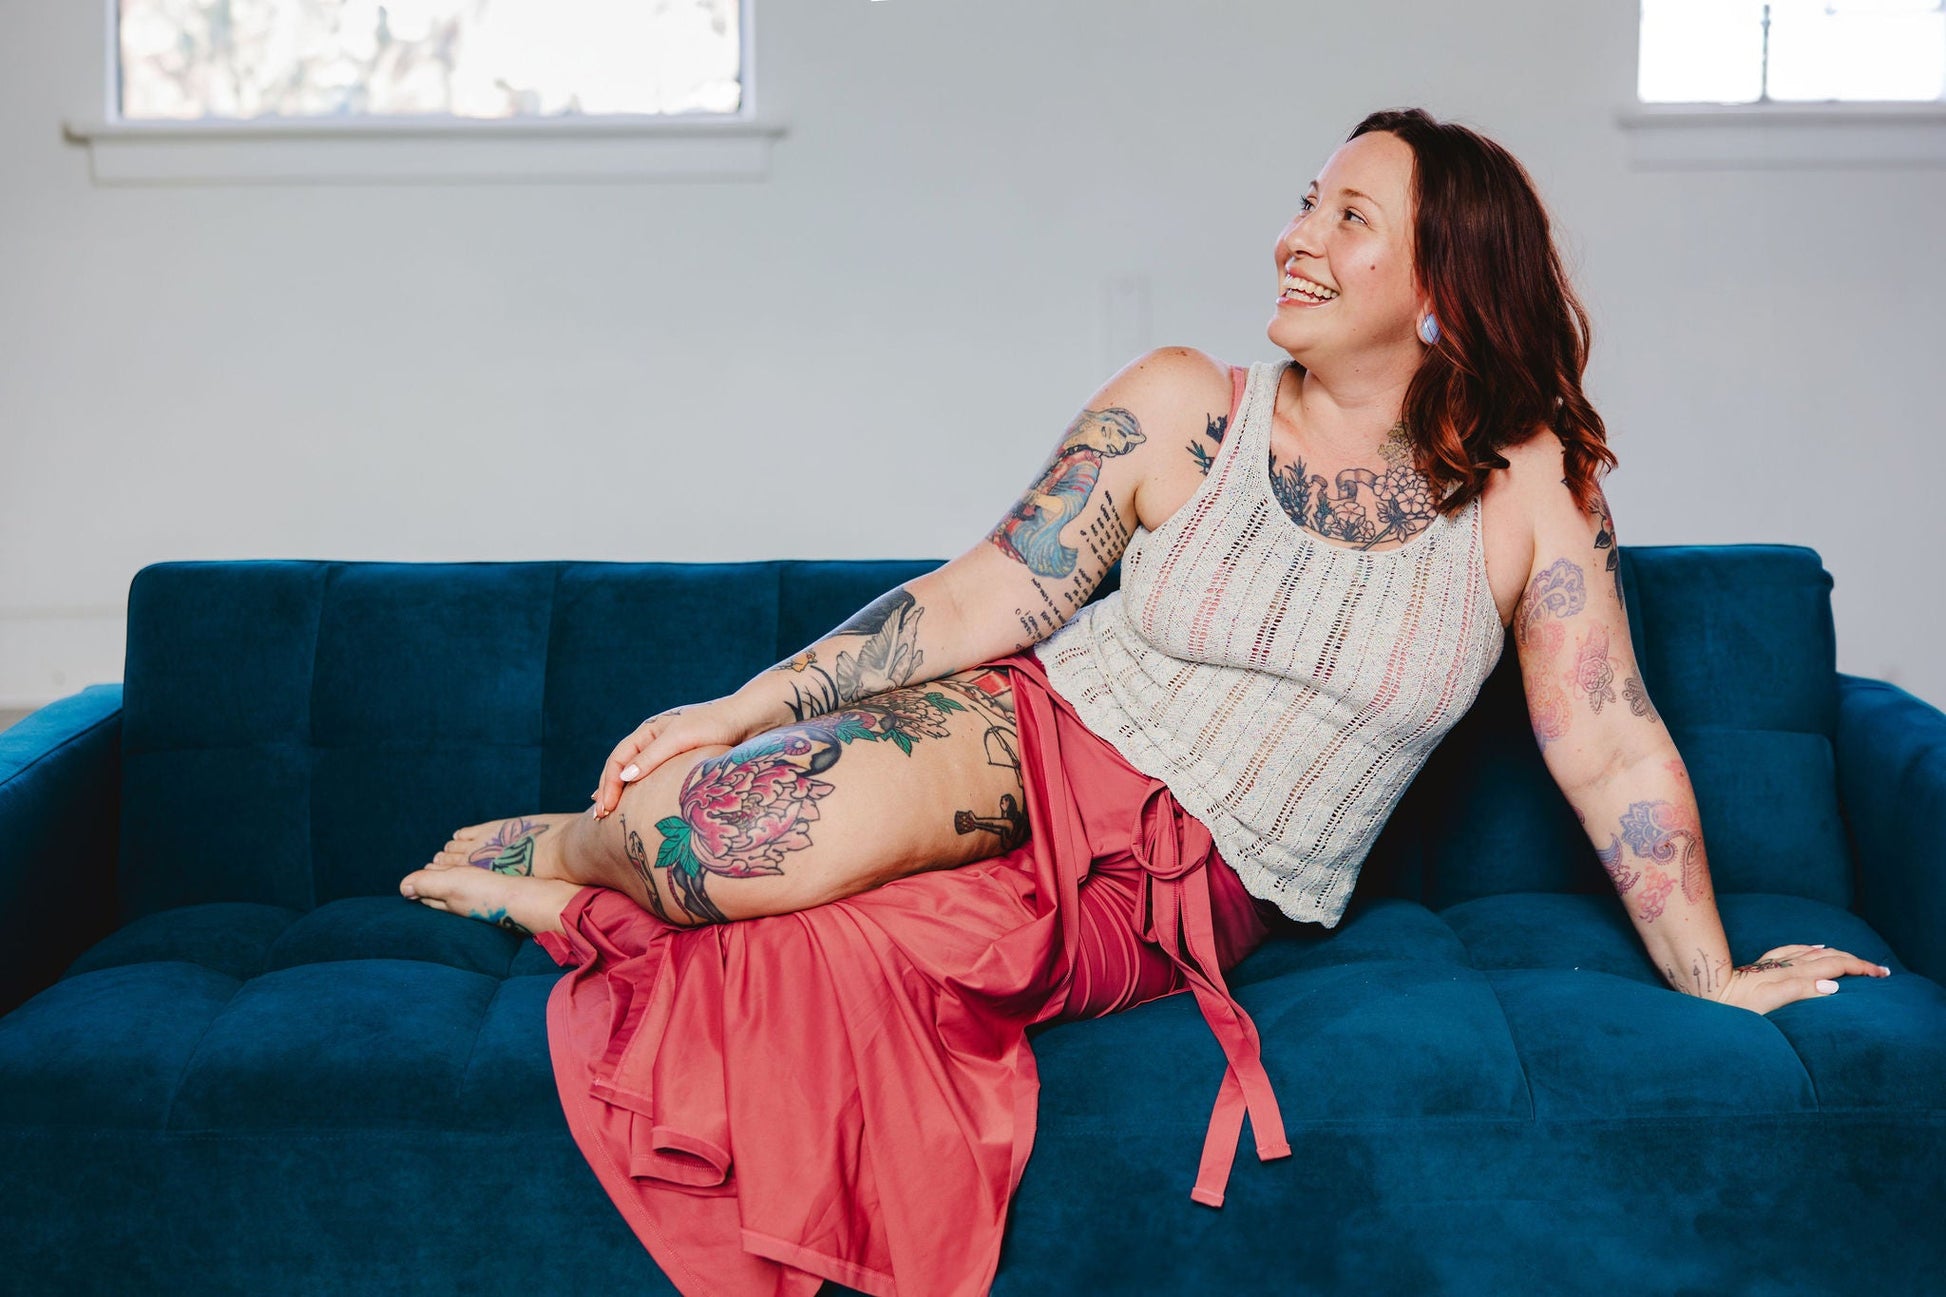 Smiling and looking off camera, Bess reclines on a couch. She wears a chevron lace knit tank, the Tori Tank, with a flowy pink skirt.